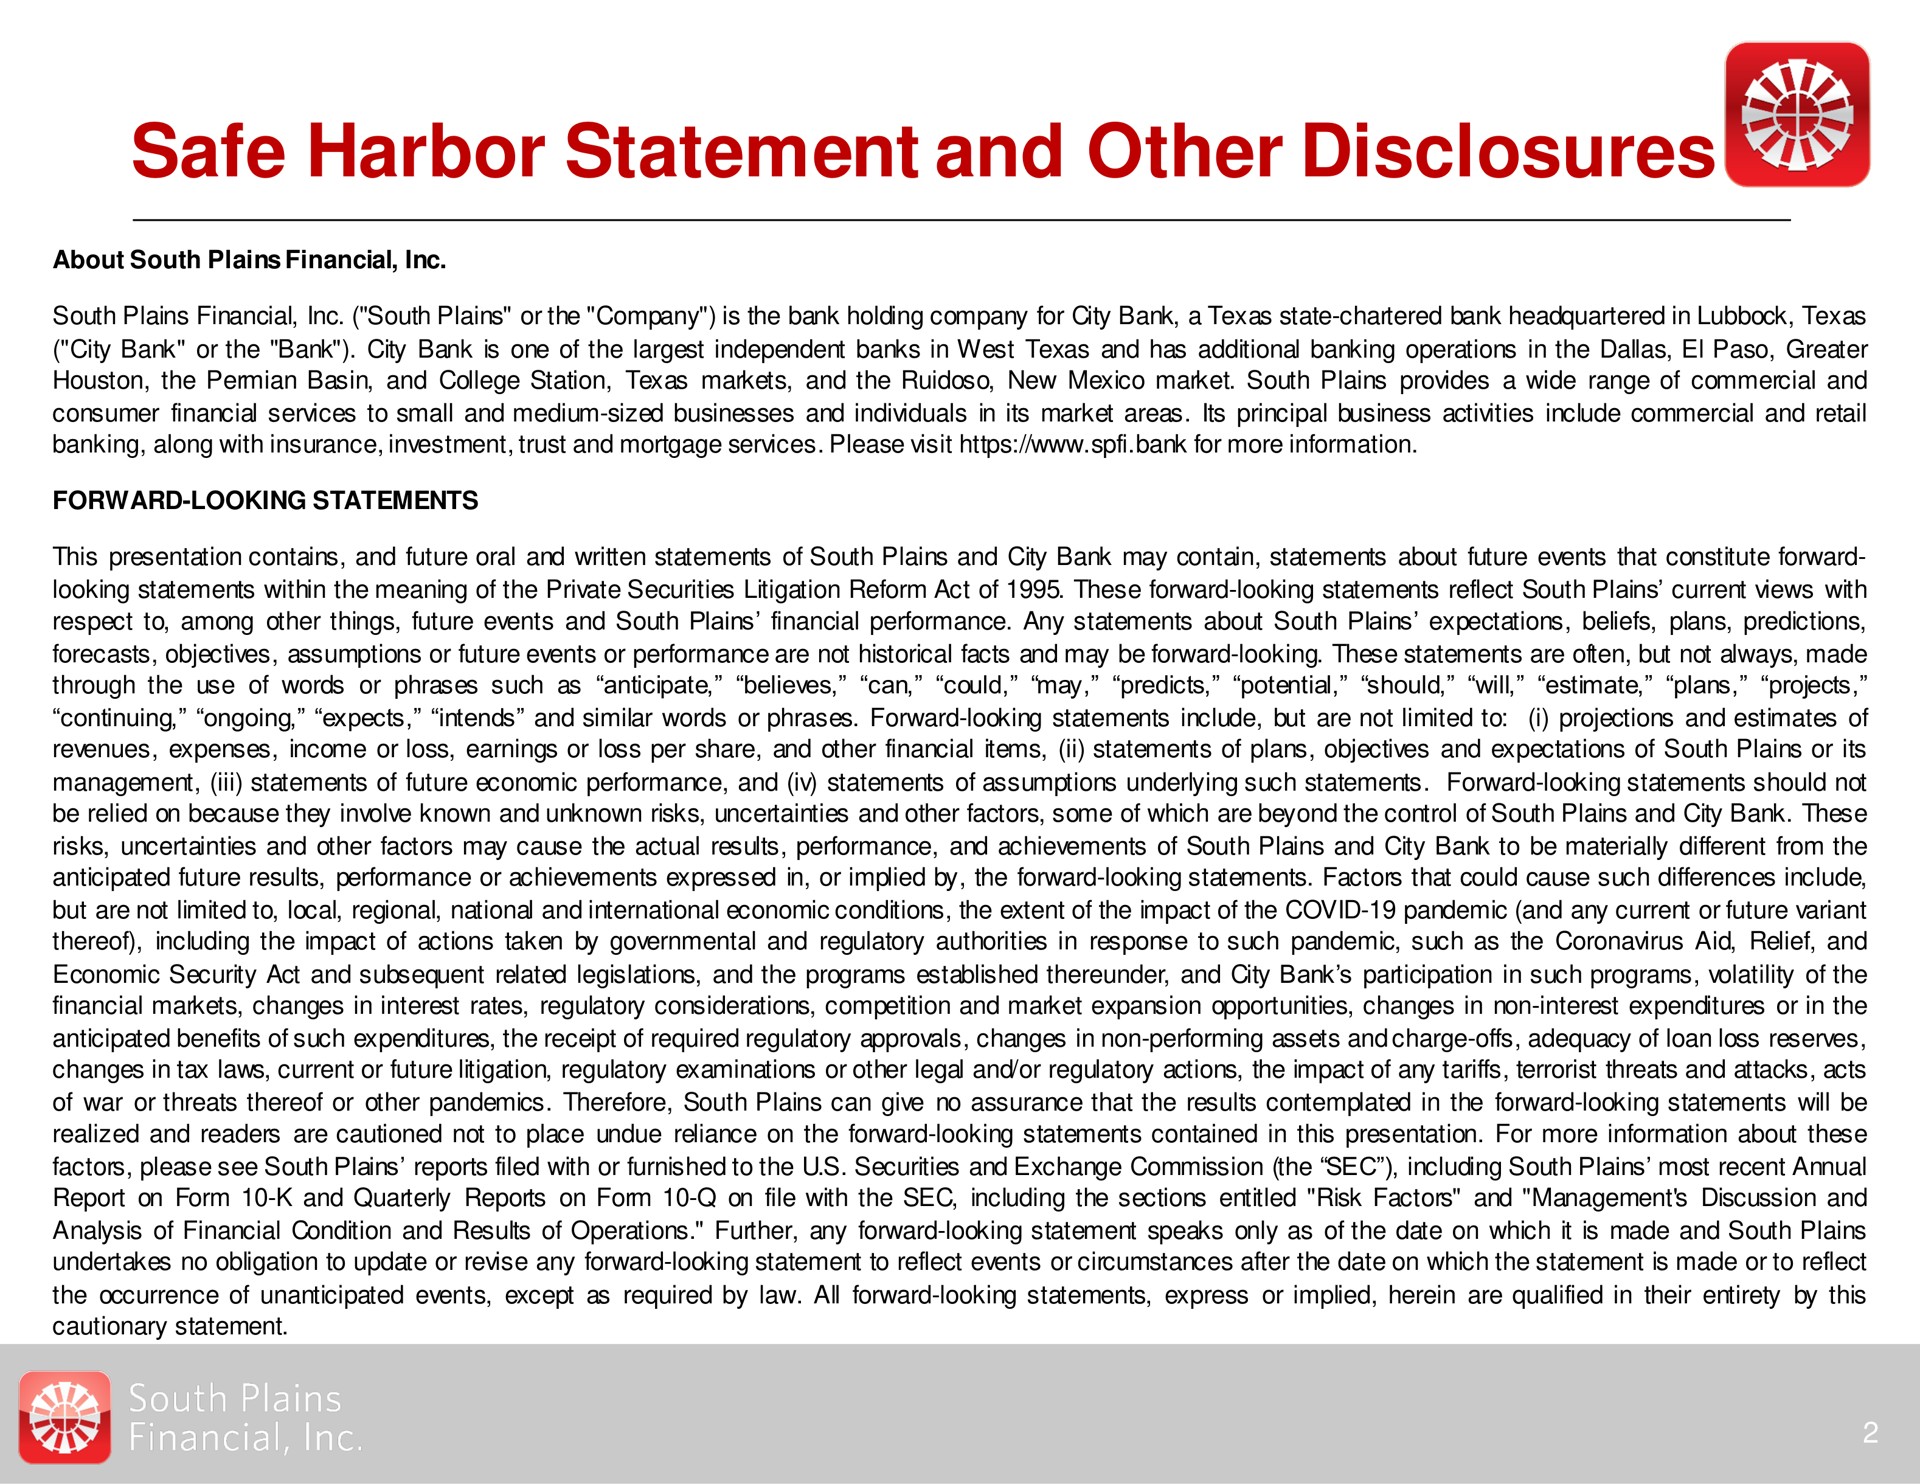 safe harbor statement and other disclosures | South Plains Financial